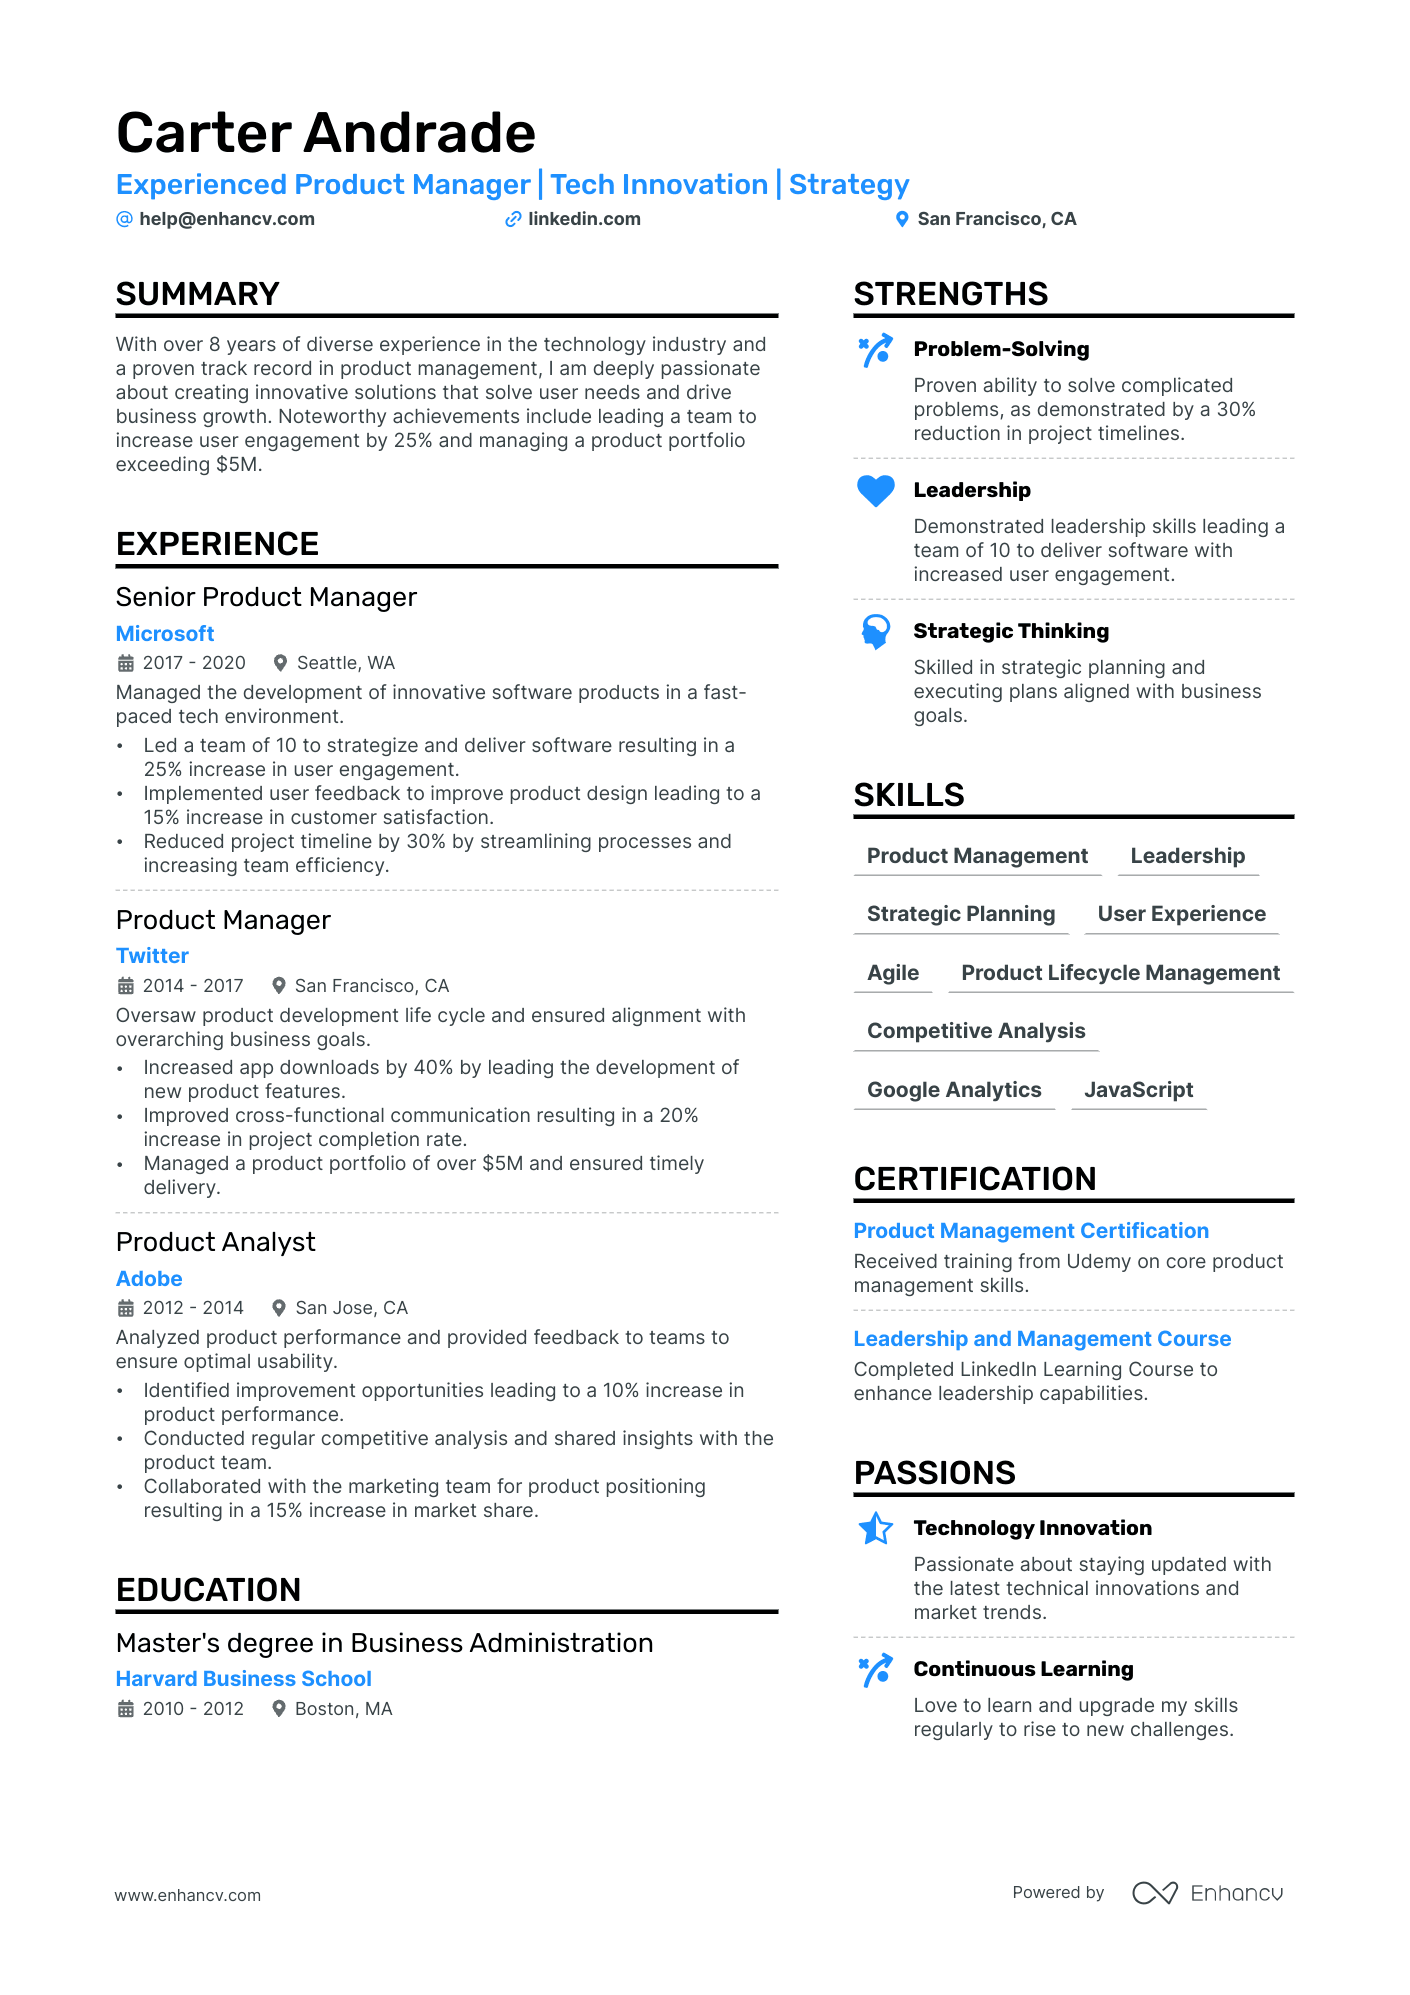 Google Product Manager resume example